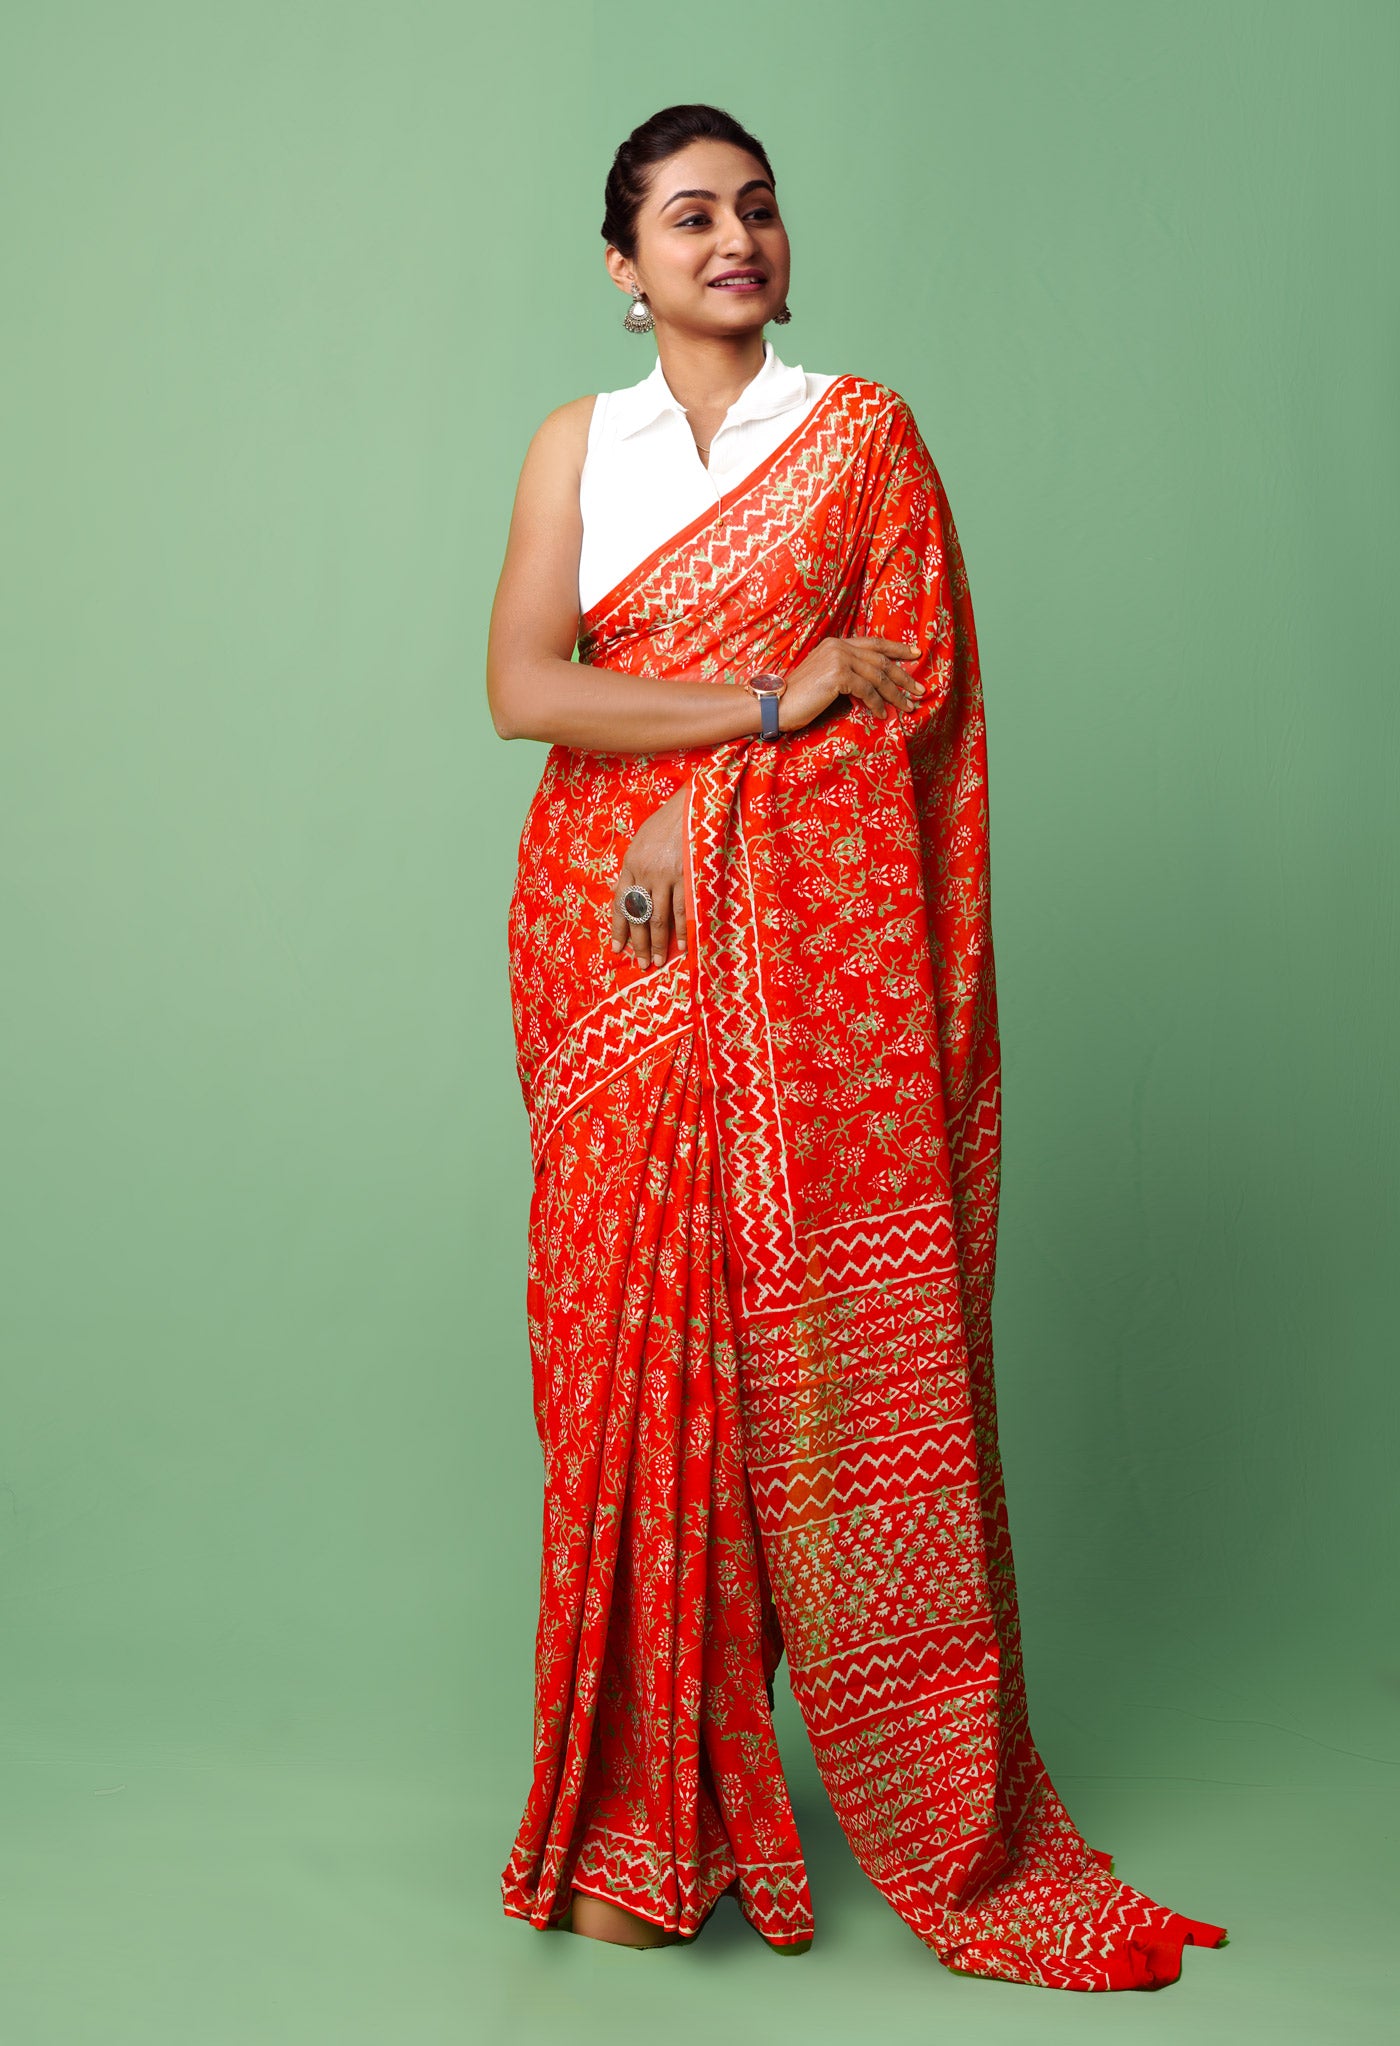 Srjati - Everyday saree to occasion sarees, we have got it all covered !  #handloomlovers #iwearhandloomsarees #handloomsarees #srjatisarees  #singularsarees